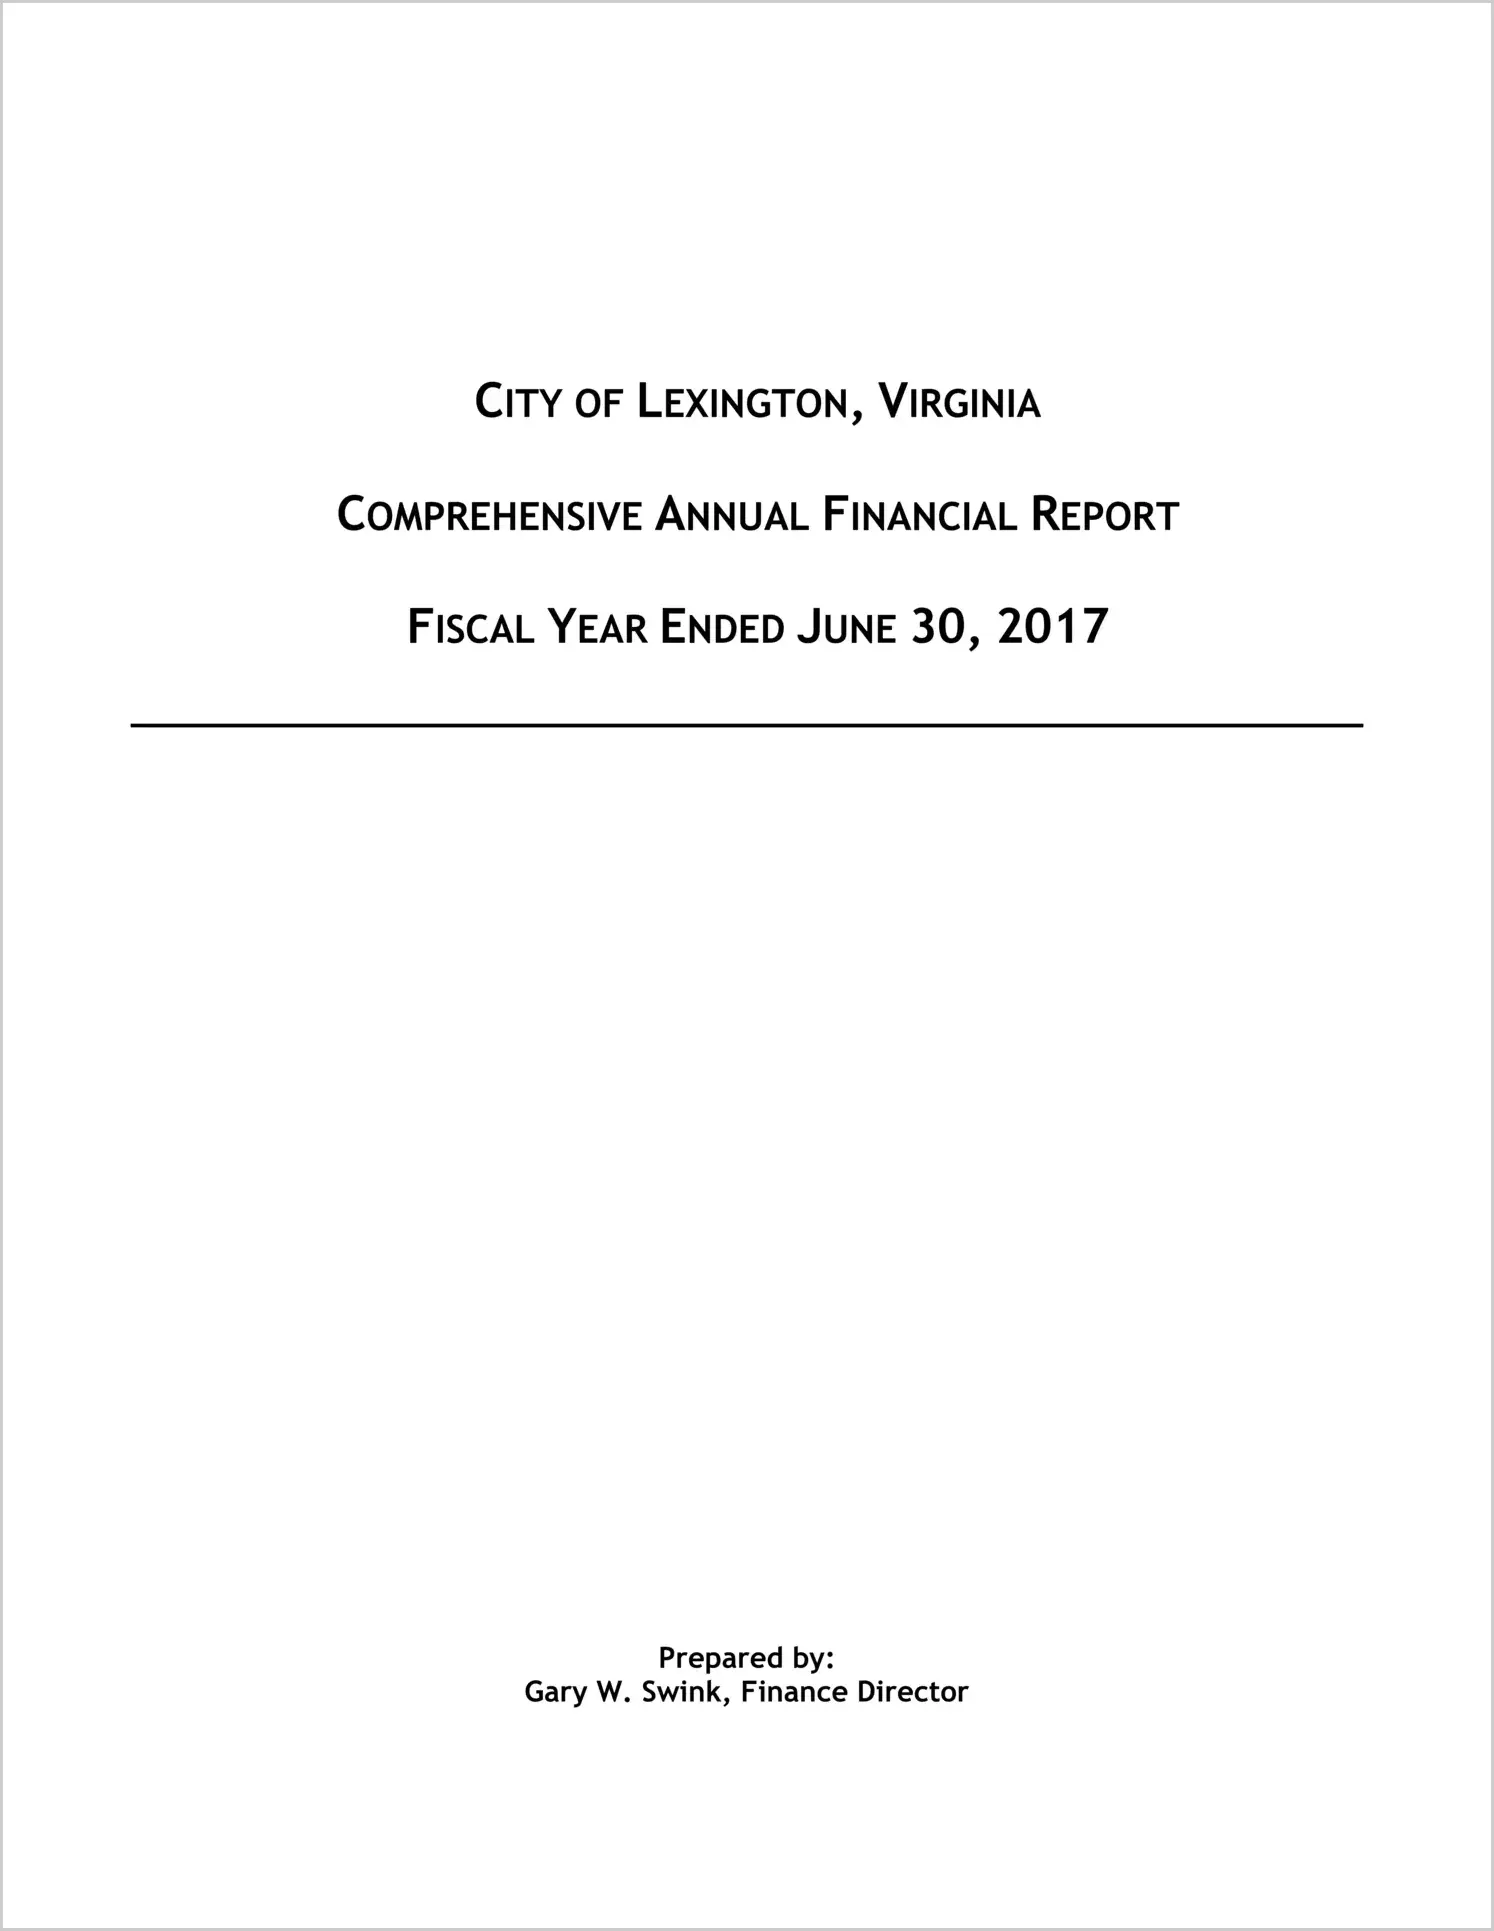 2017 Annual Financial Report for City of Lexington